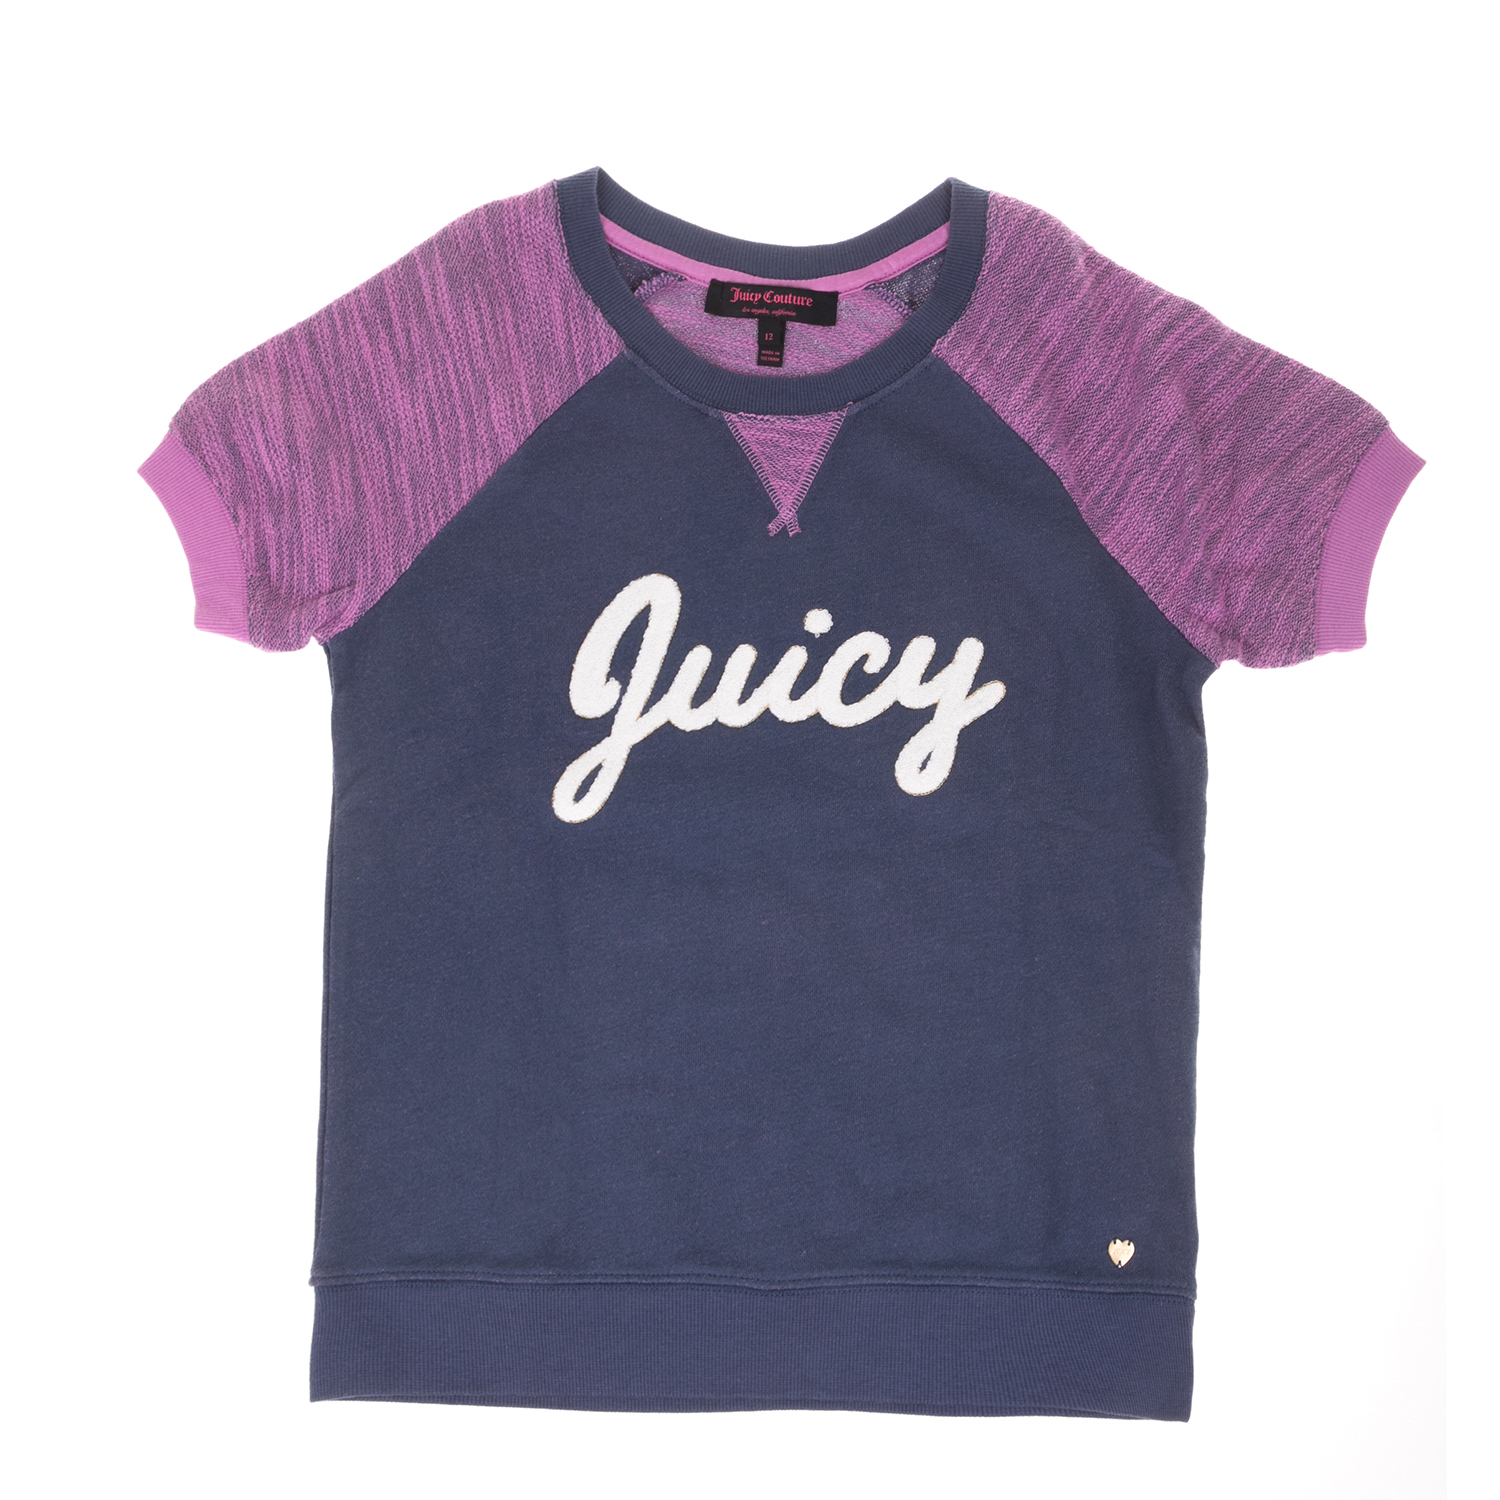 JUICY COUTURE KIDS Κοριτσίστικη μπλούζα JUICY COUTURE PULLOVER μοβ